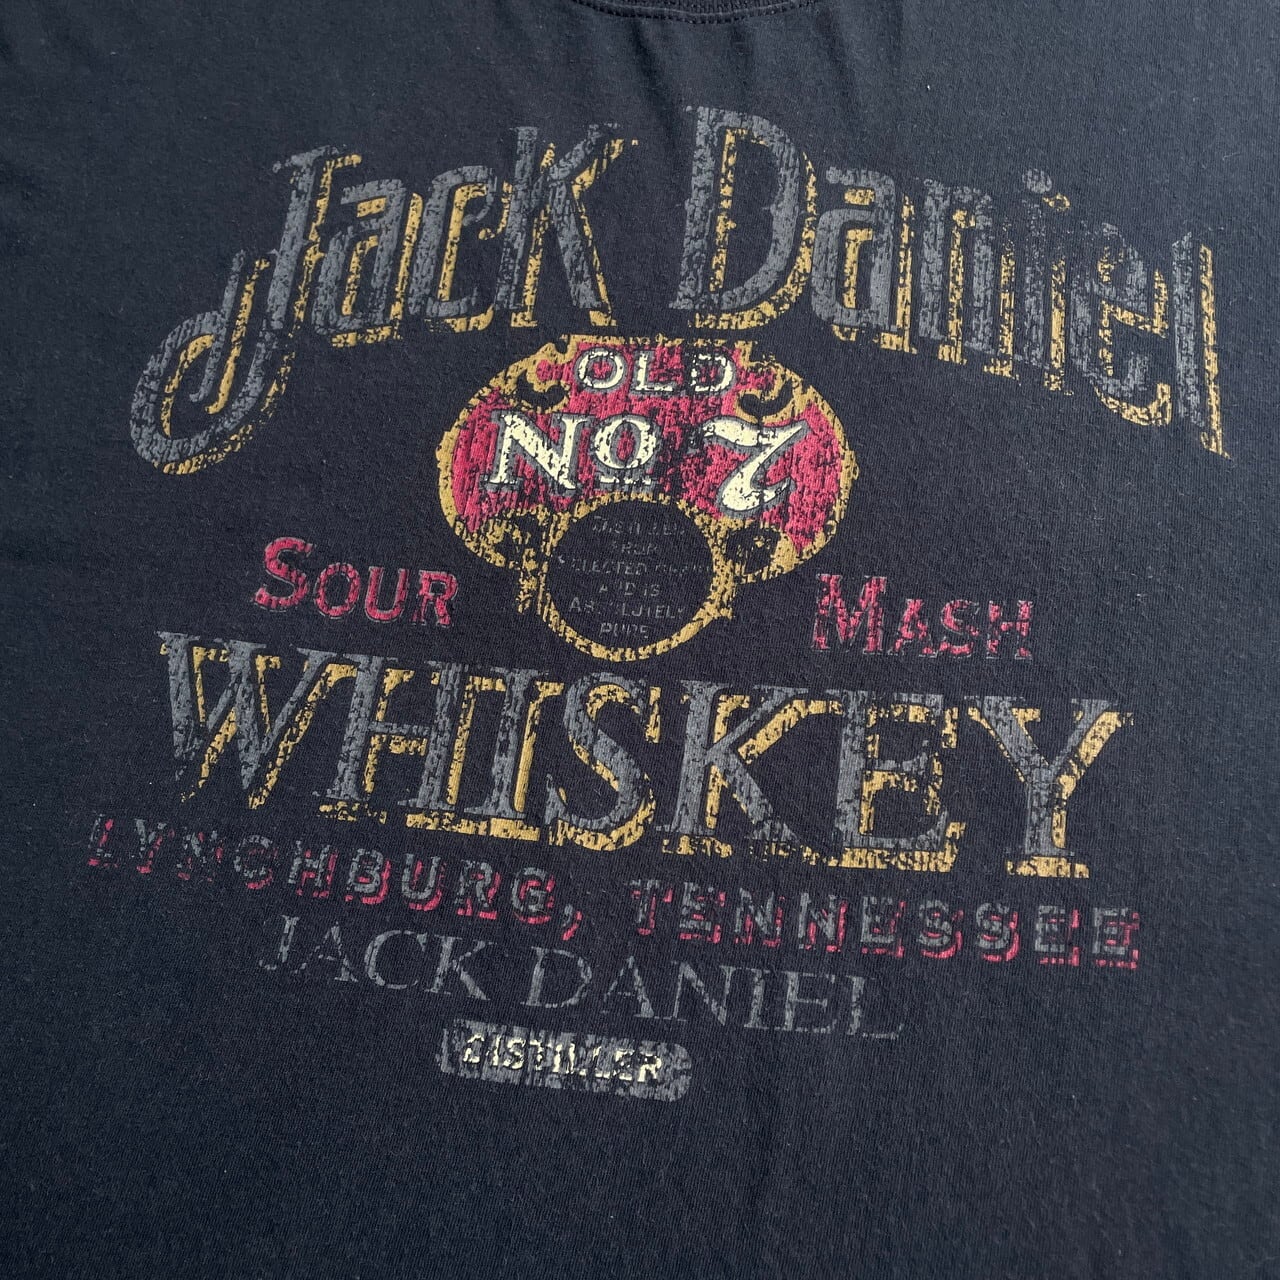 RED ROCK OF THE T-SHIRTS /JACK DANIEL’s